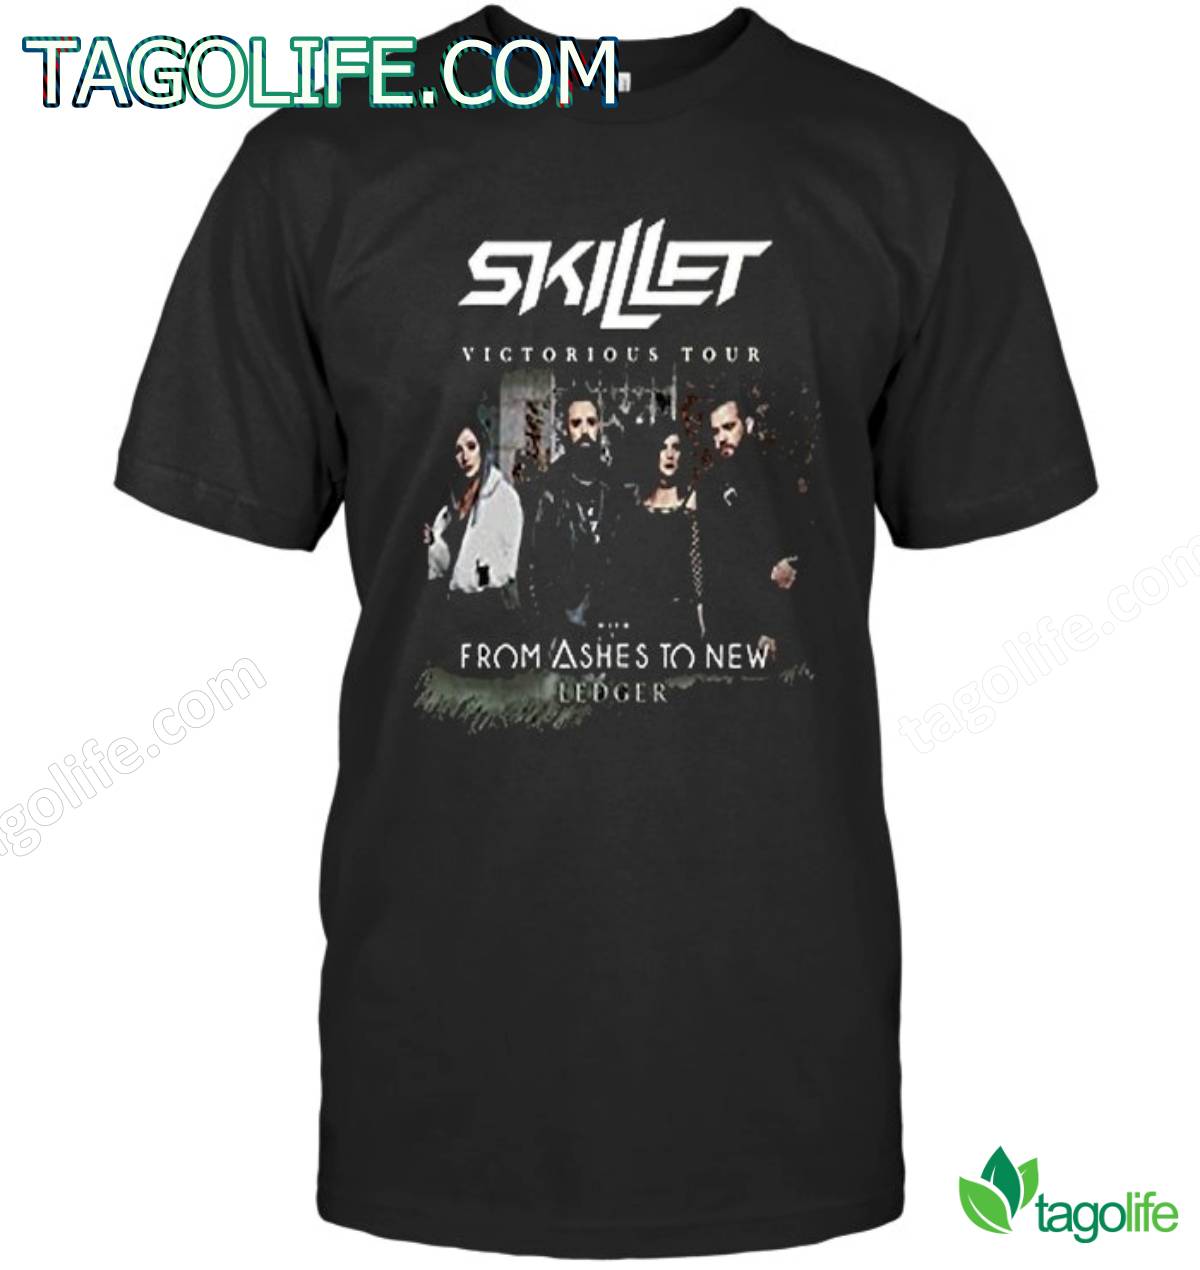 Skillet Victorious Tour From Ashes To New Ledger Shirt, Tank Top